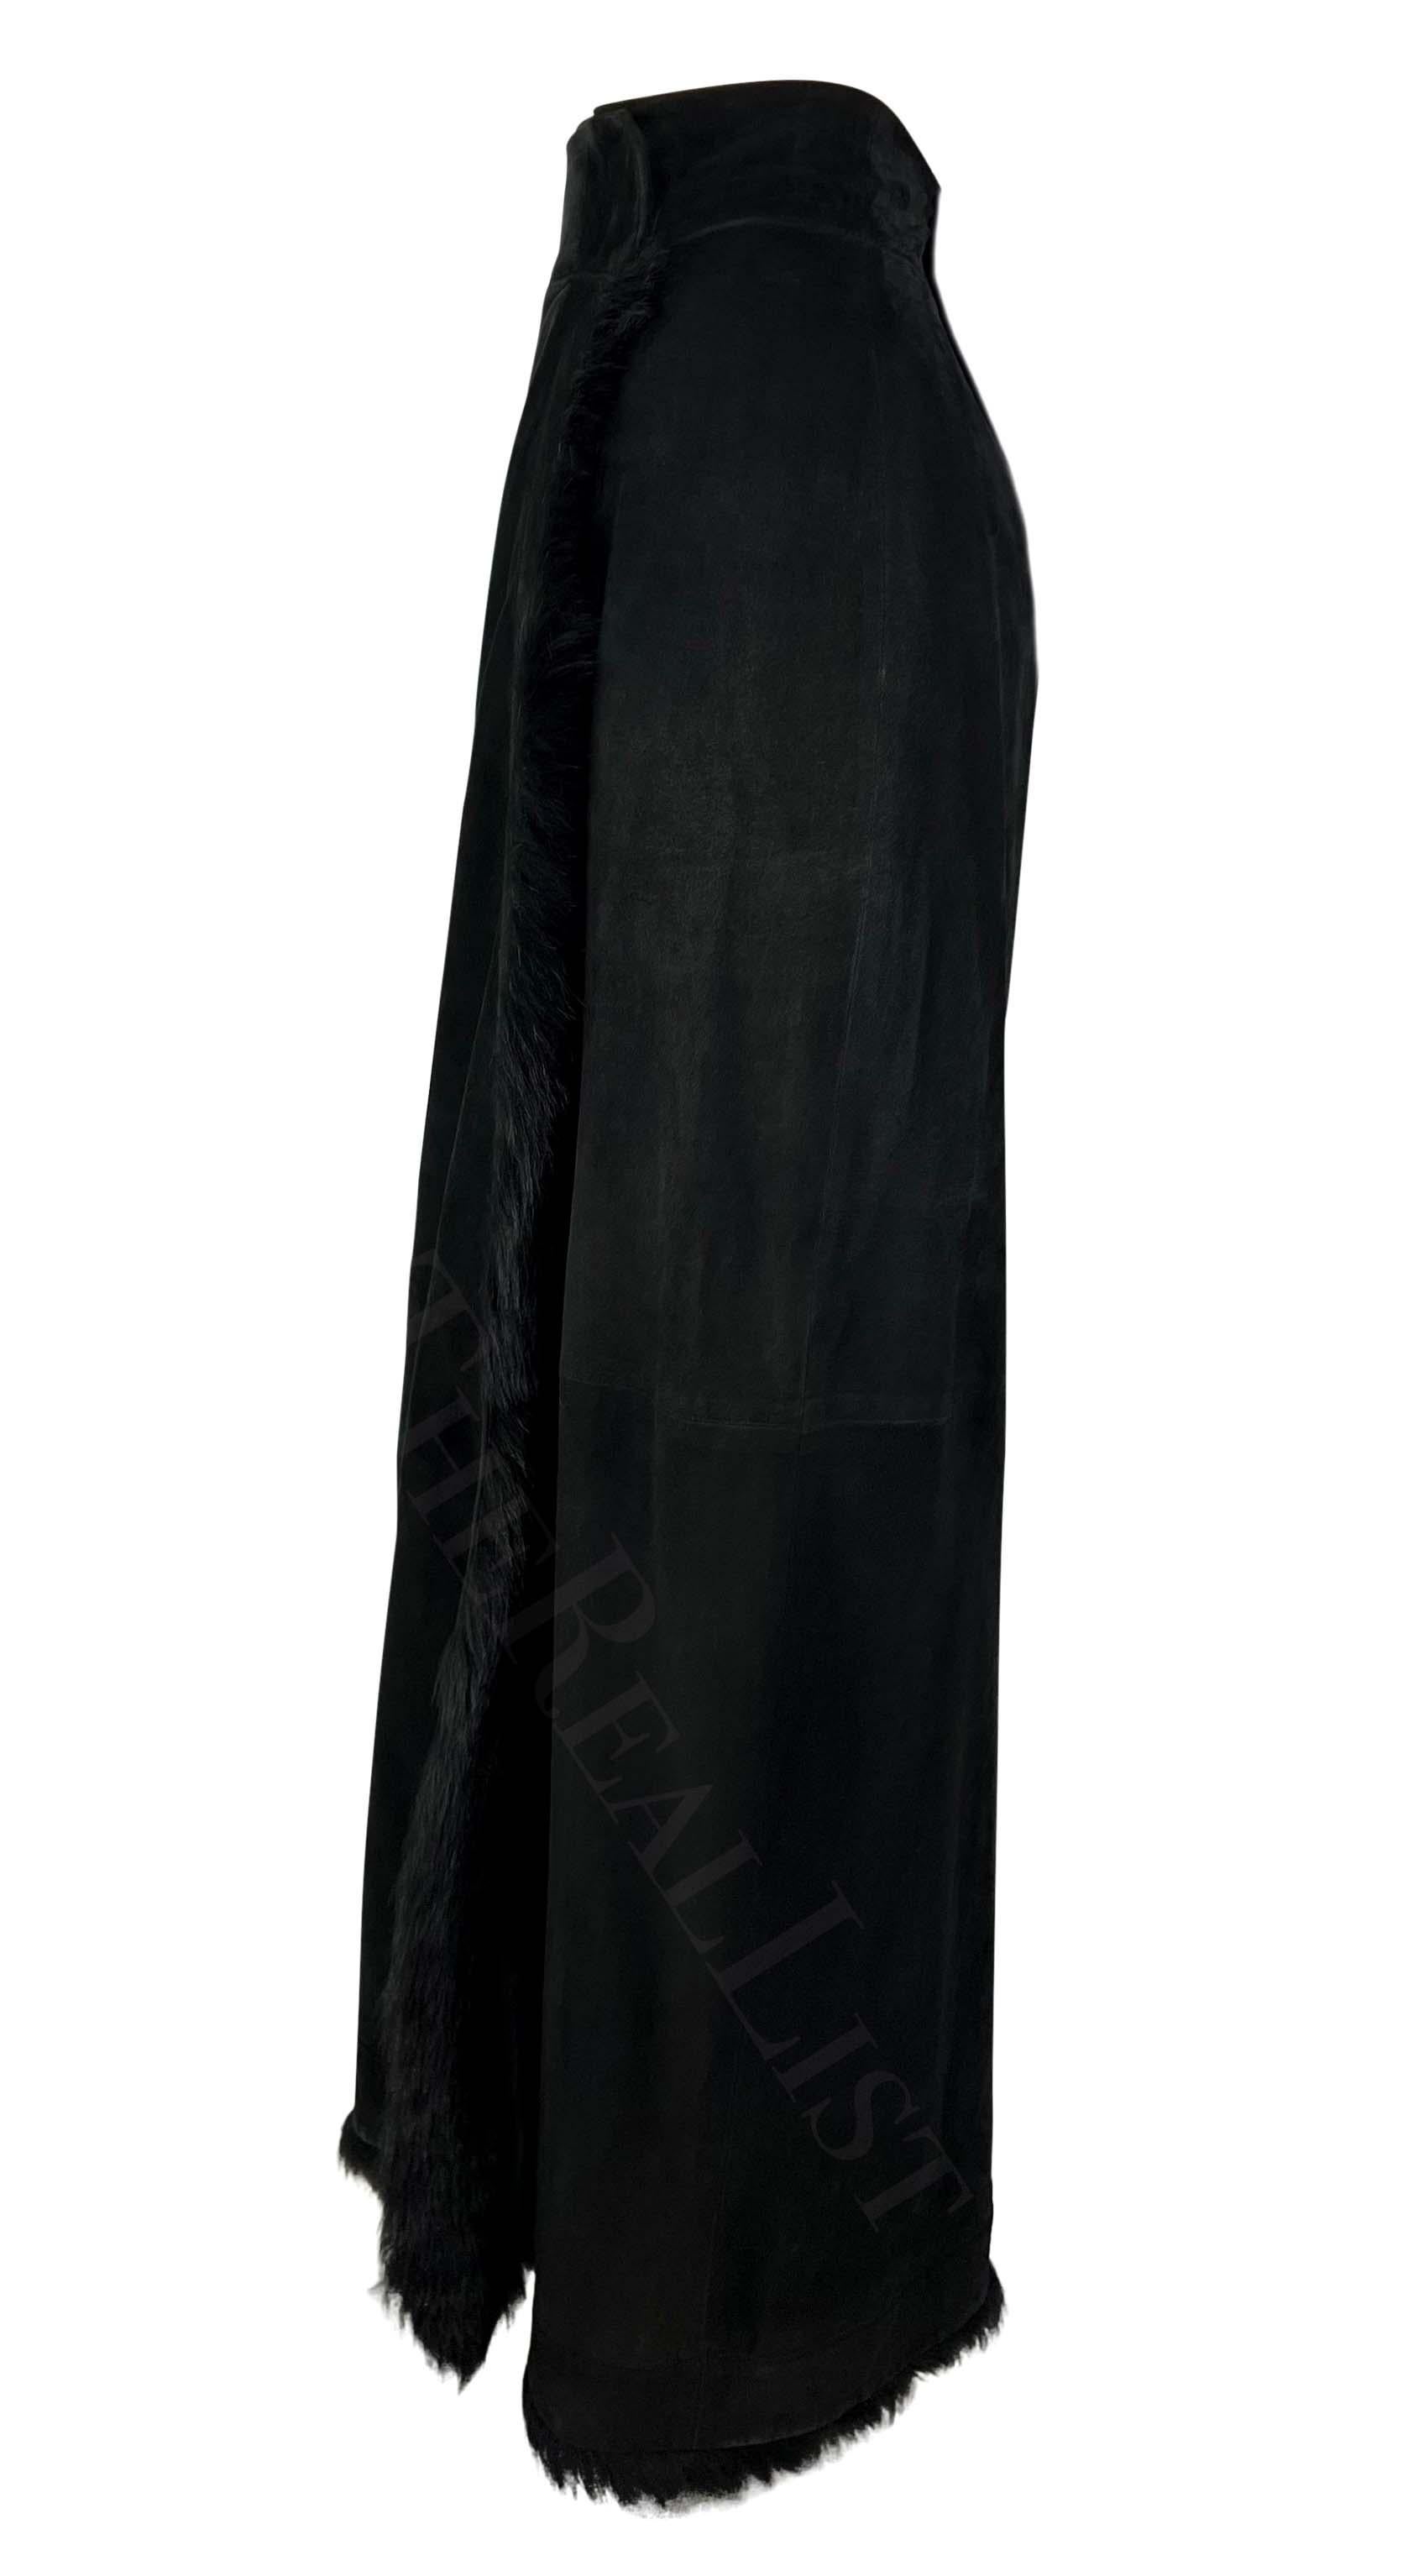 F/W 1996 Gucci by Tom Ford Runway Black Suede Fur Wrap Maxi Slit Skirt In Good Condition For Sale In West Hollywood, CA